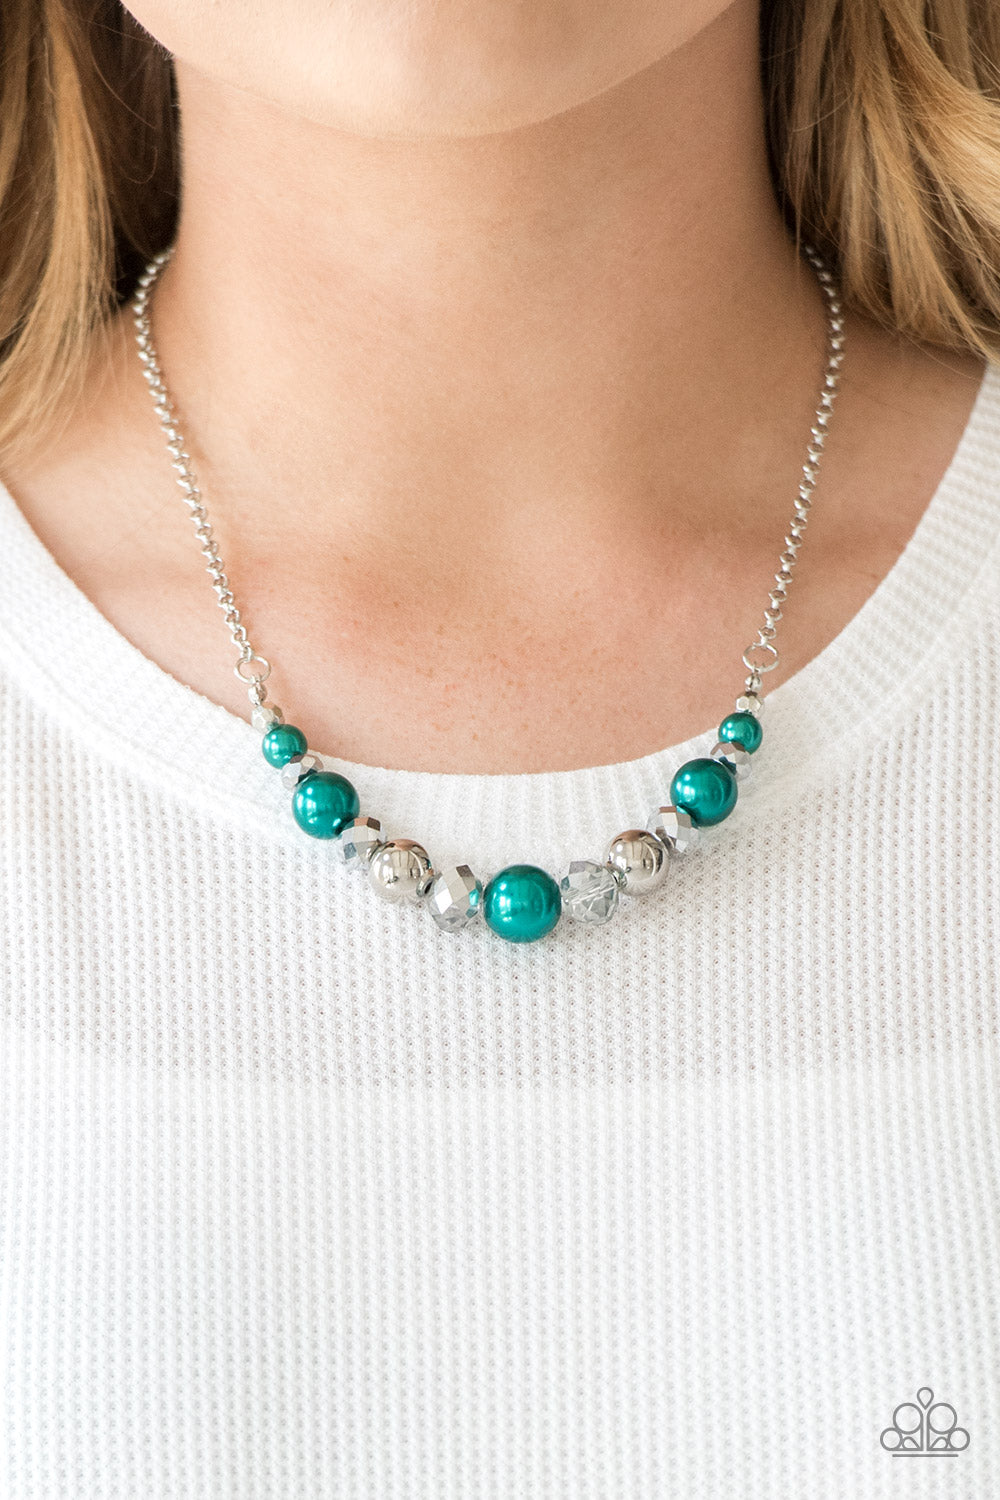 The Big-Leaguer Green Necklace